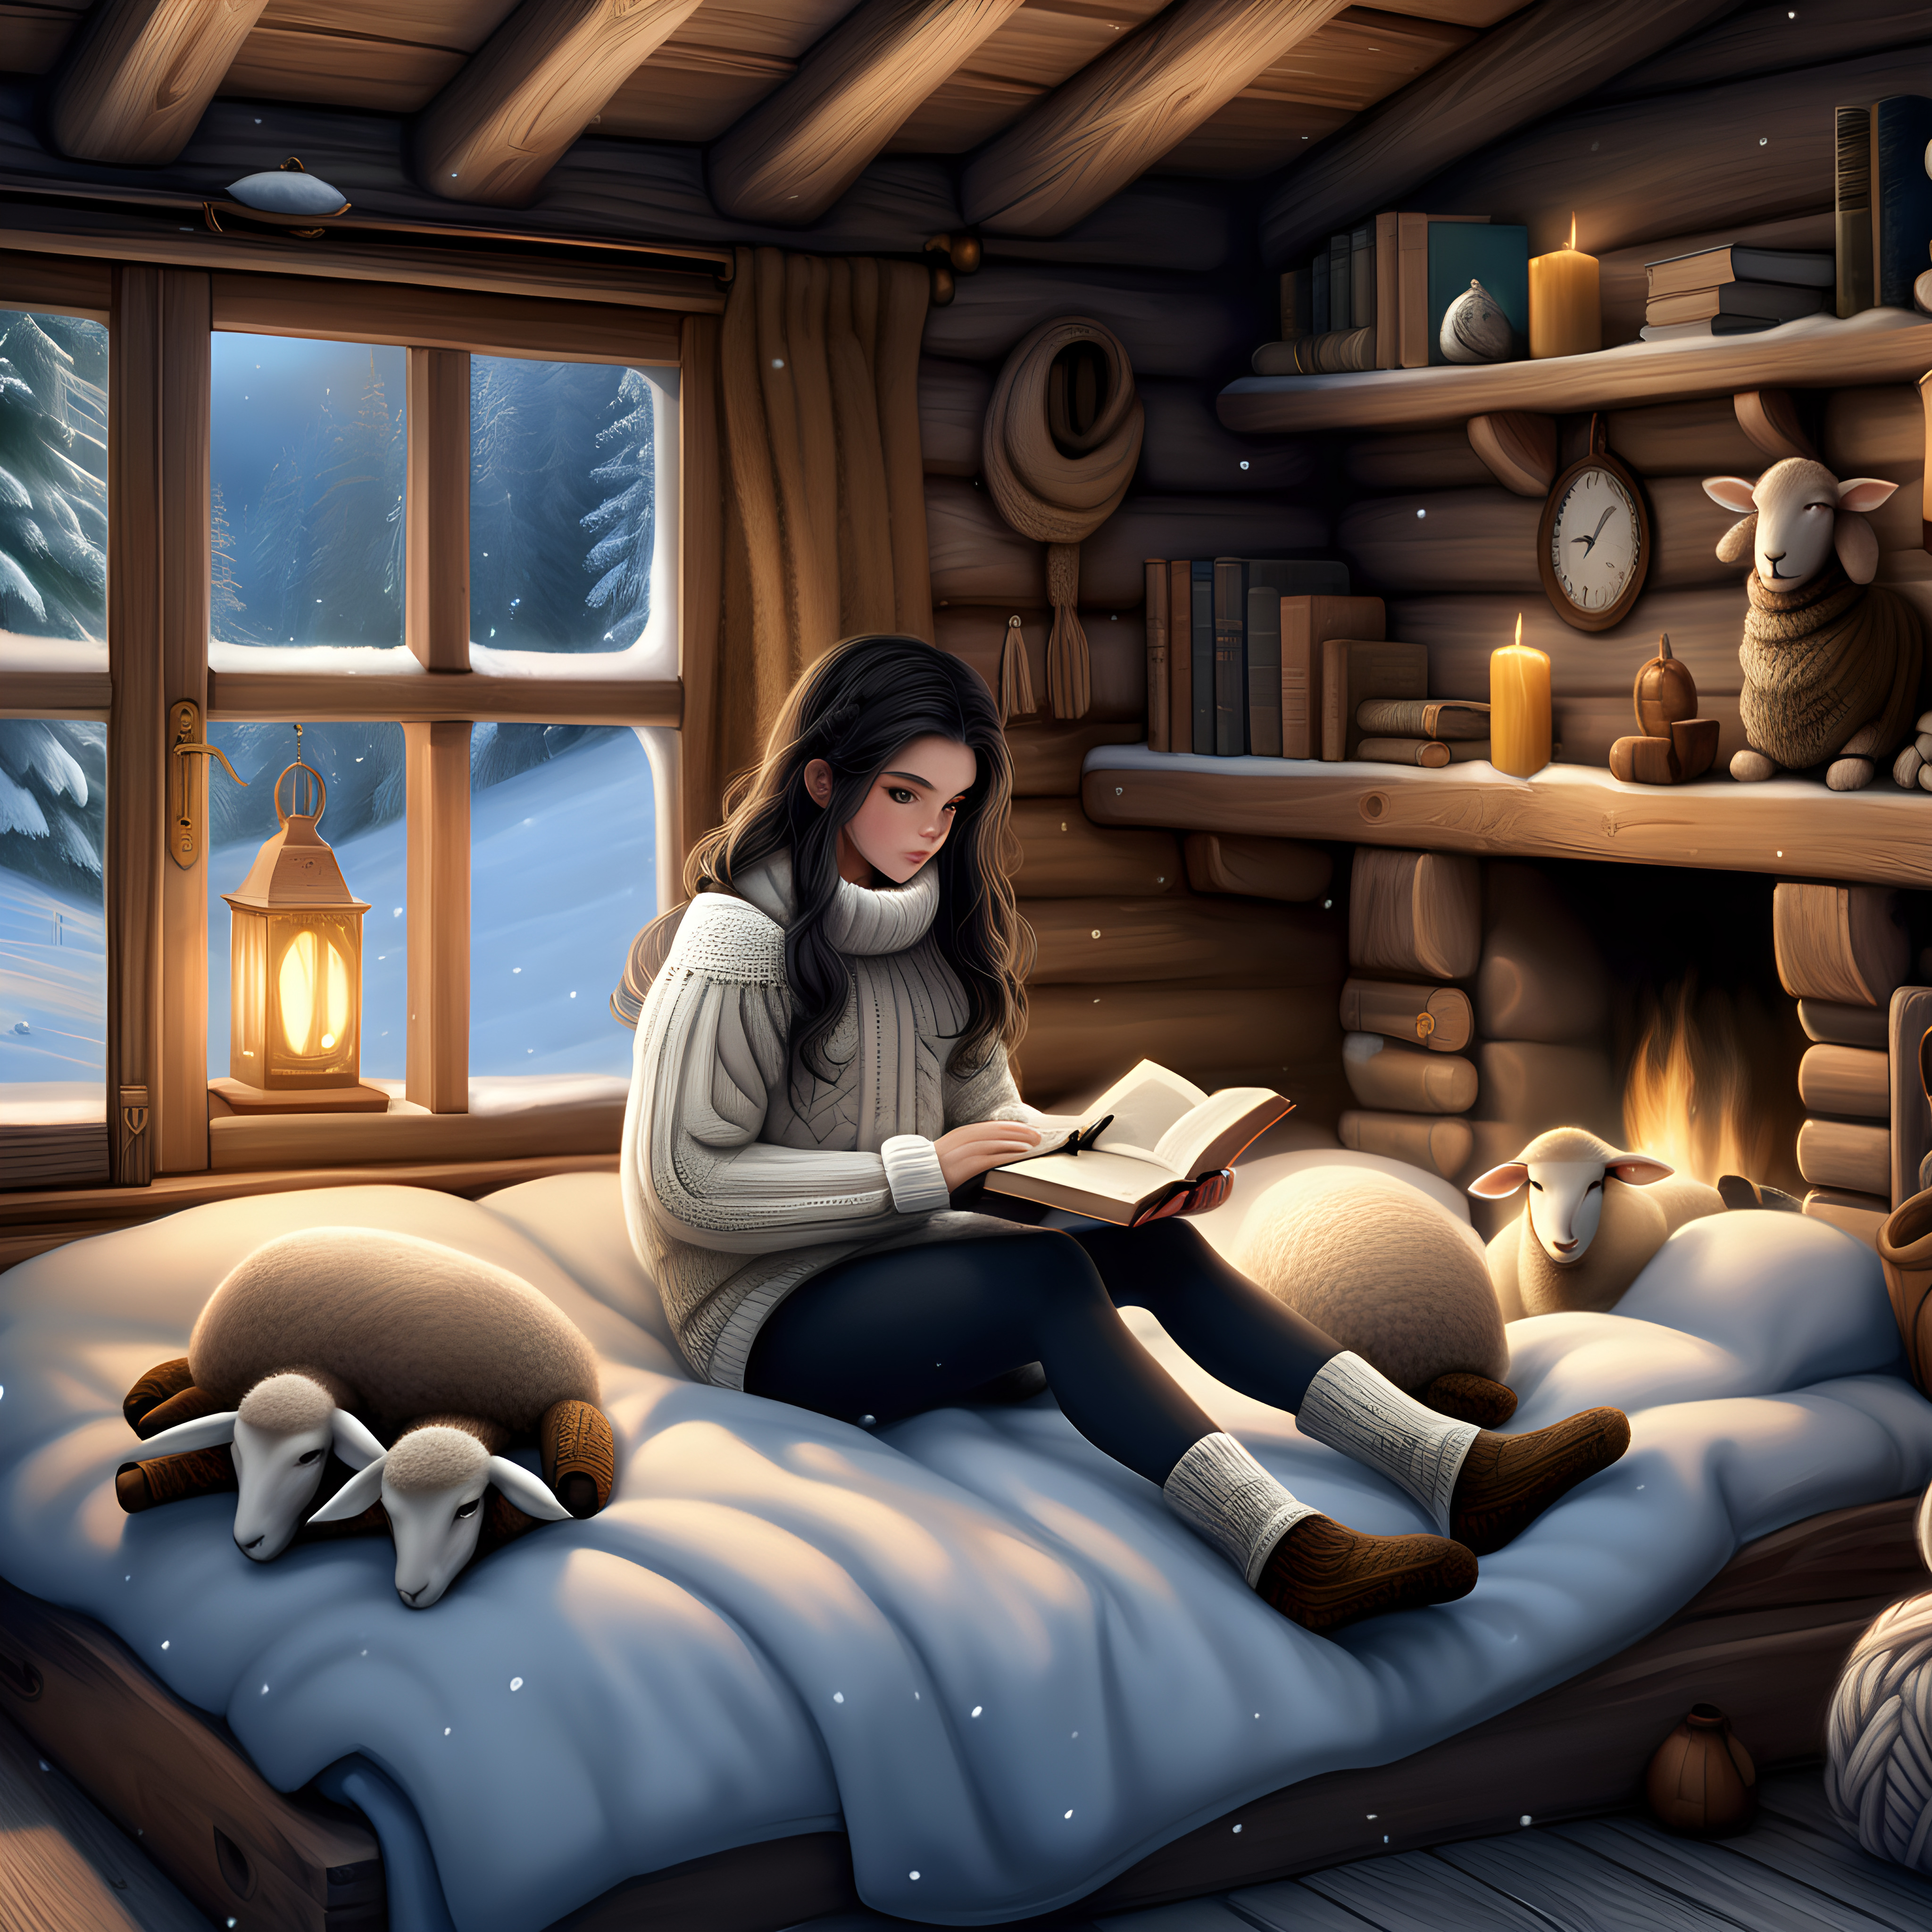 Deep winter . Its dark night - only yellow moon on sky and few blinks of light in the snowy tree crowns. Inside cozy wooden winter cabin with small windows hot girl with black hair and green eyes lay on wooden low bed covered with brownish soft and mossy lamb skin. There is a big and hot stone fireplace.  Bed is covered with knitted woolen blankets in brown and white. Girl wearing black leggings tights, wrinkled knitted white and brown woolen socks. White without sleeves thick and coarsely woven sweater, knitted woven handmade slippers. Around laying some sci-fi books, unfinished knitted socks - many pairs. Near the wooden door with small windows are thick rubber boots, shotgun, shells, big knife.